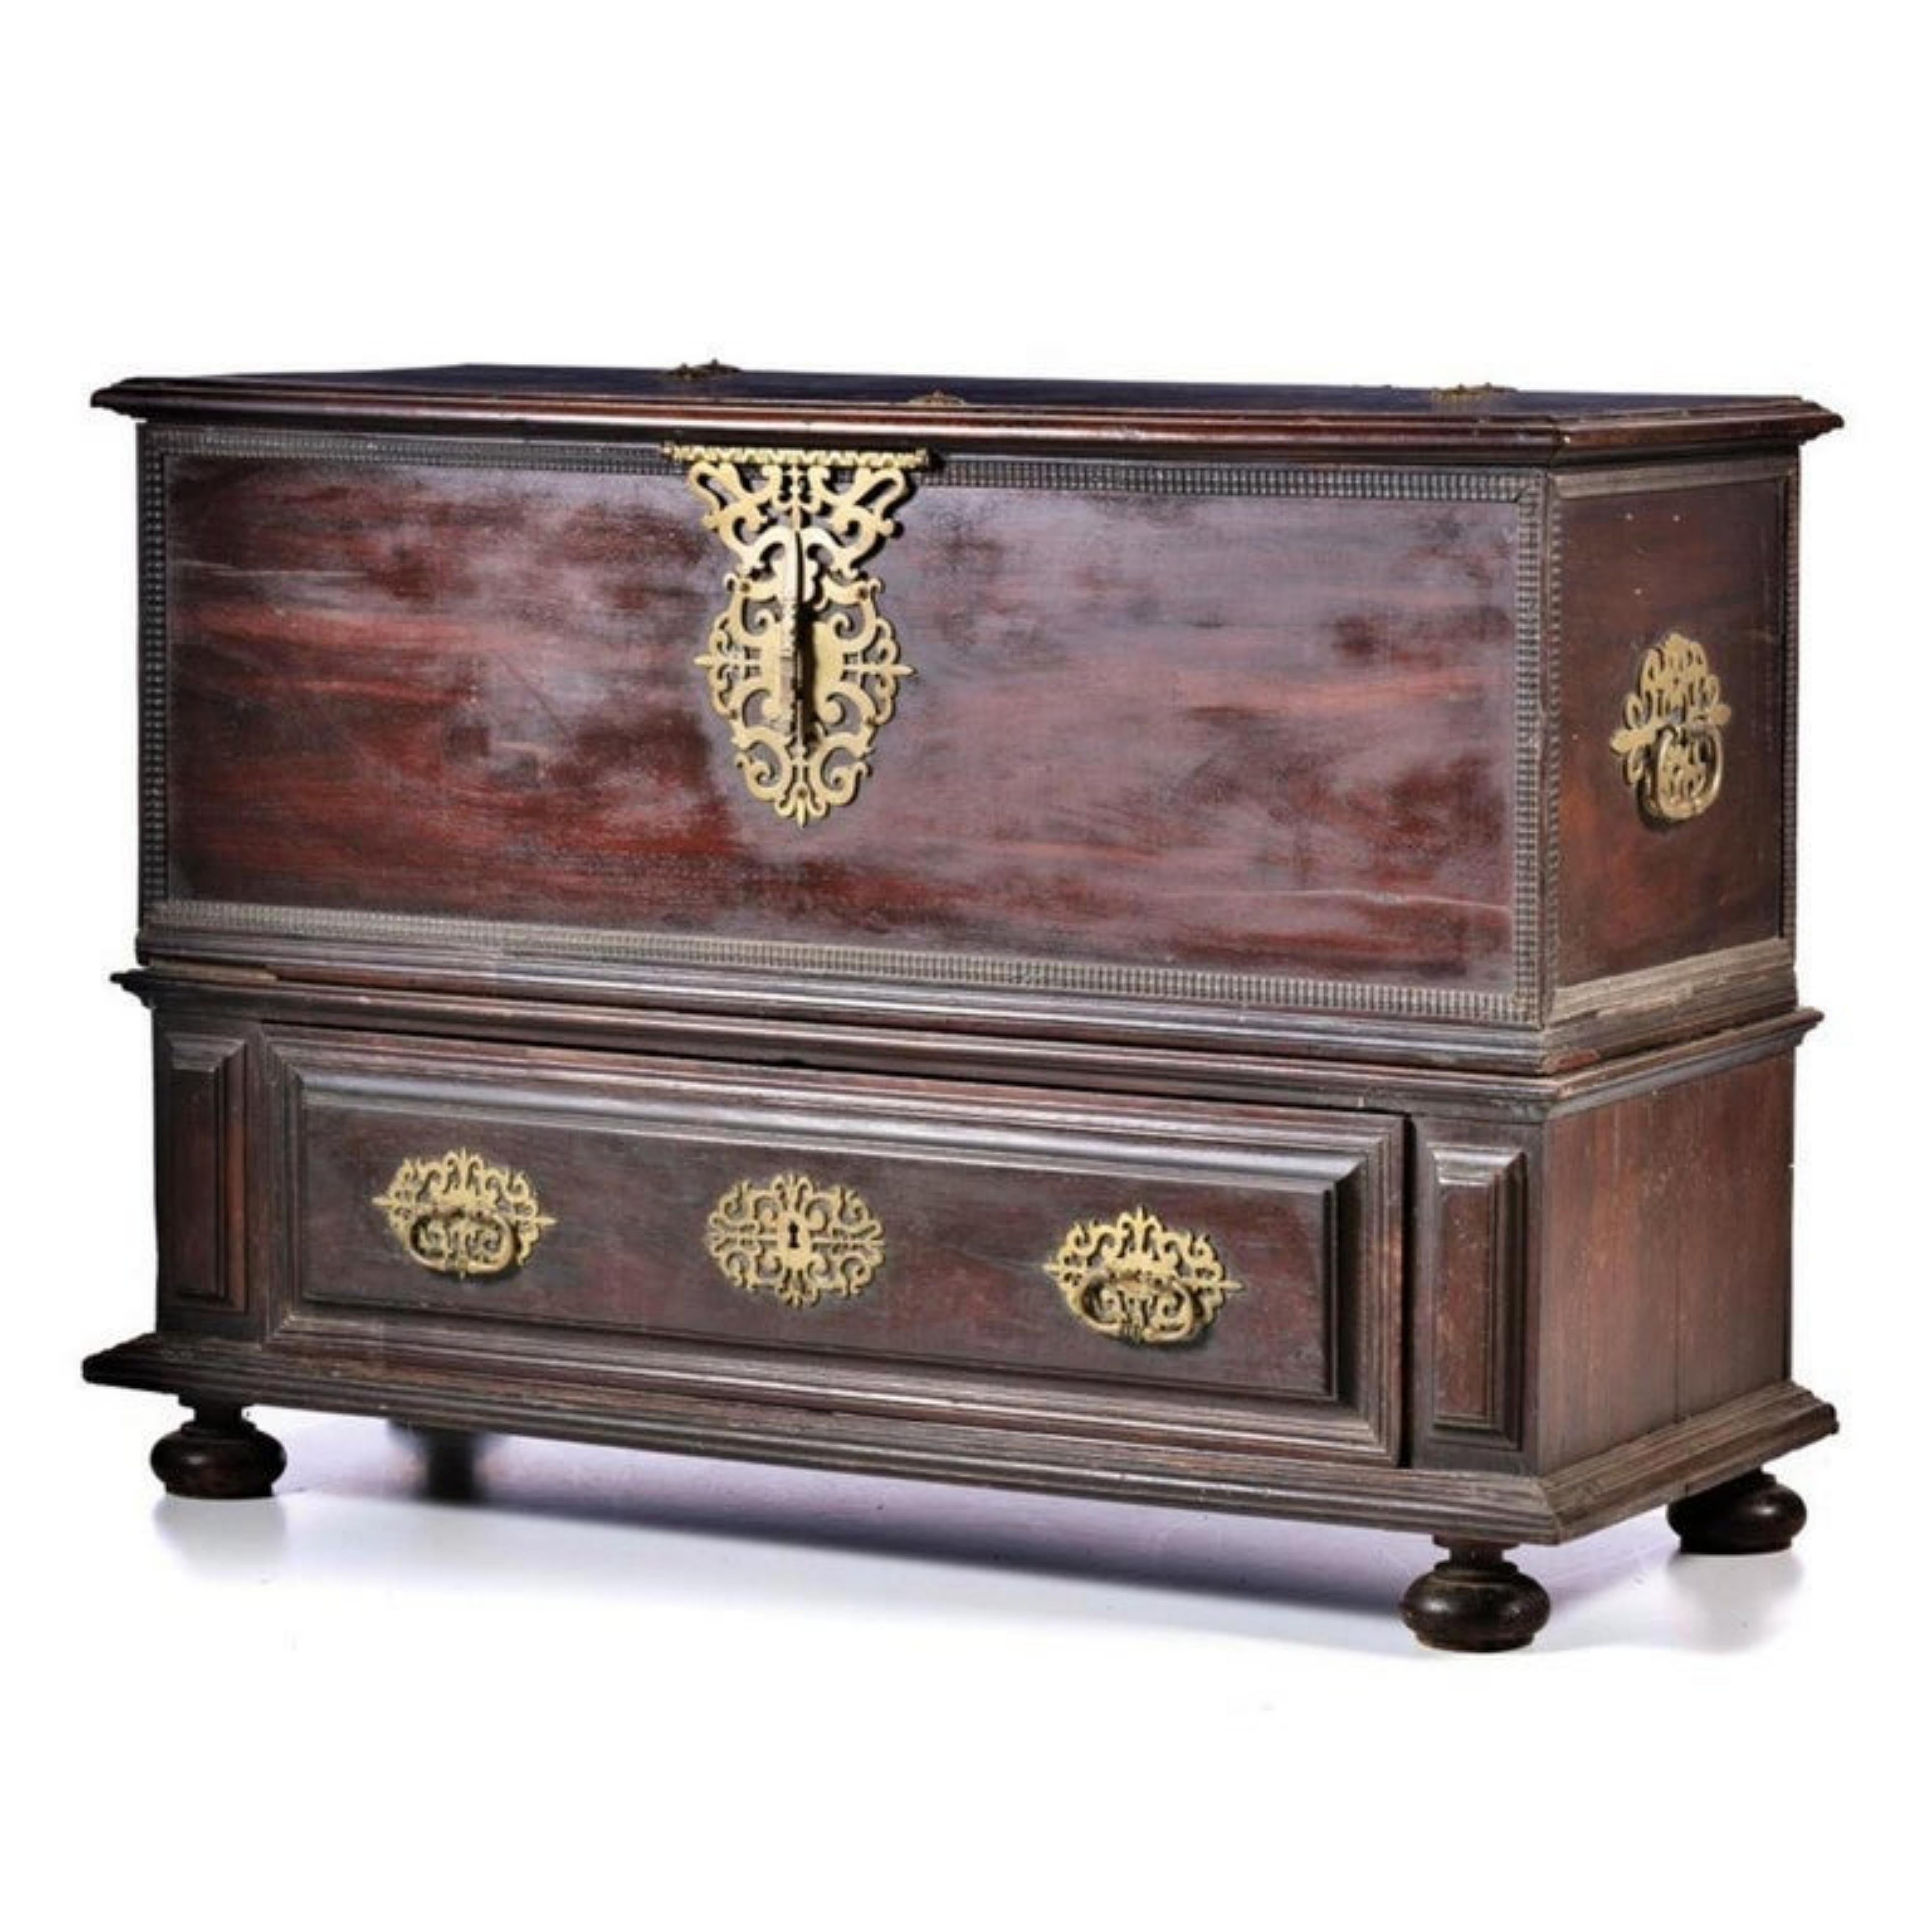 Portuguese ark of large dimensions from the 17th century
in vignetting wood with a drawer and metal fittings. 
Bronze fittings. 
Defects of the age 
Dimensions: 114 x 160 x 65 cm.

Very good condition.
  